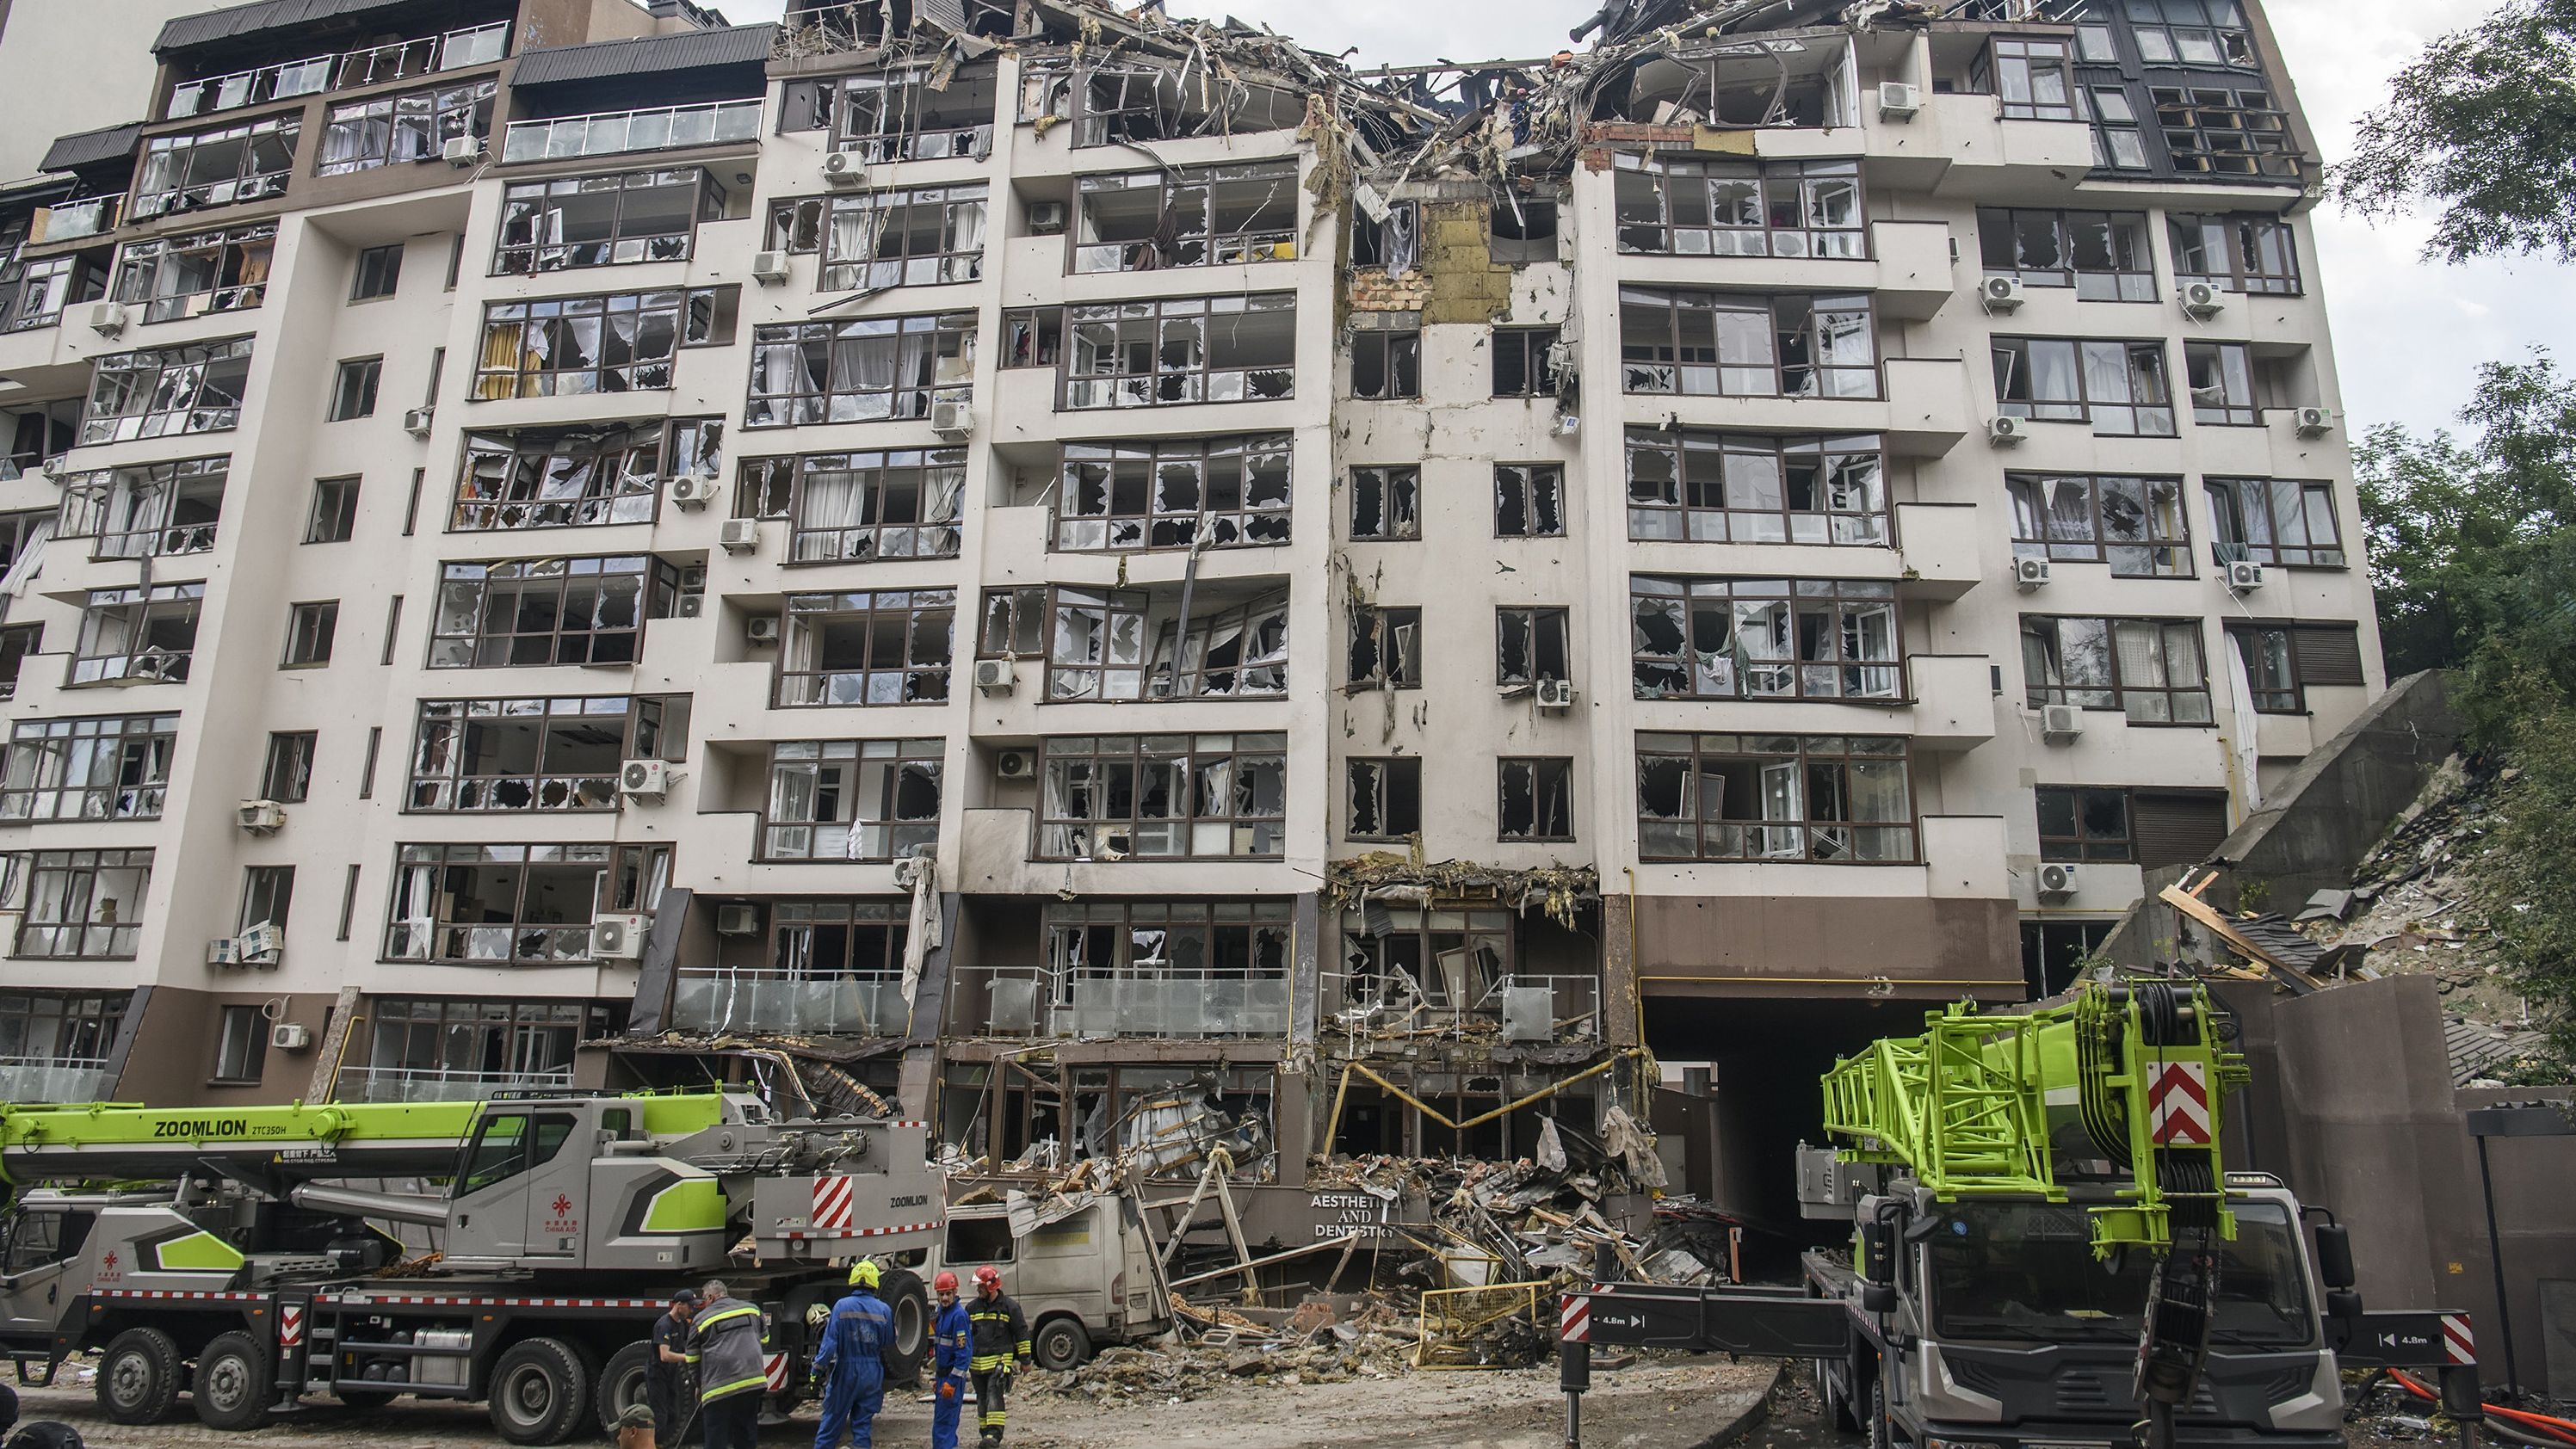 An apartment building in the Shevchenkivskiy district of Kyiv, Ukraine, is damaged during a Russian airstrike, on June 26. Several explosions rocked the west of the Ukrainian capital in the early hours of Sunday morning, with at least two residential buildings struck, according to Kyiv mayor Vitali Klitschko. 